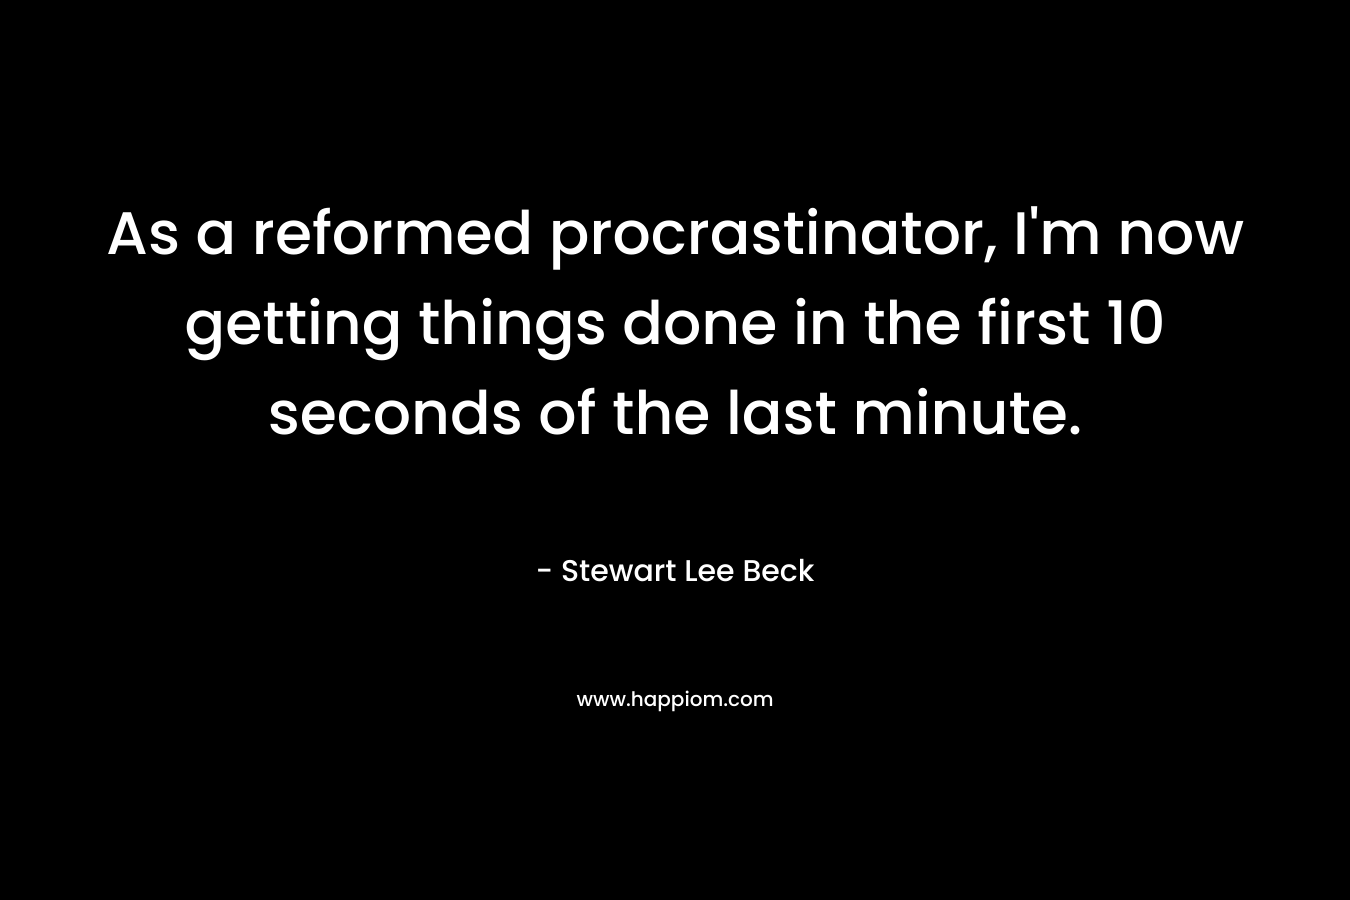 As a reformed procrastinator, I’m now getting things done in the first 10 seconds of the last minute. – Stewart Lee Beck